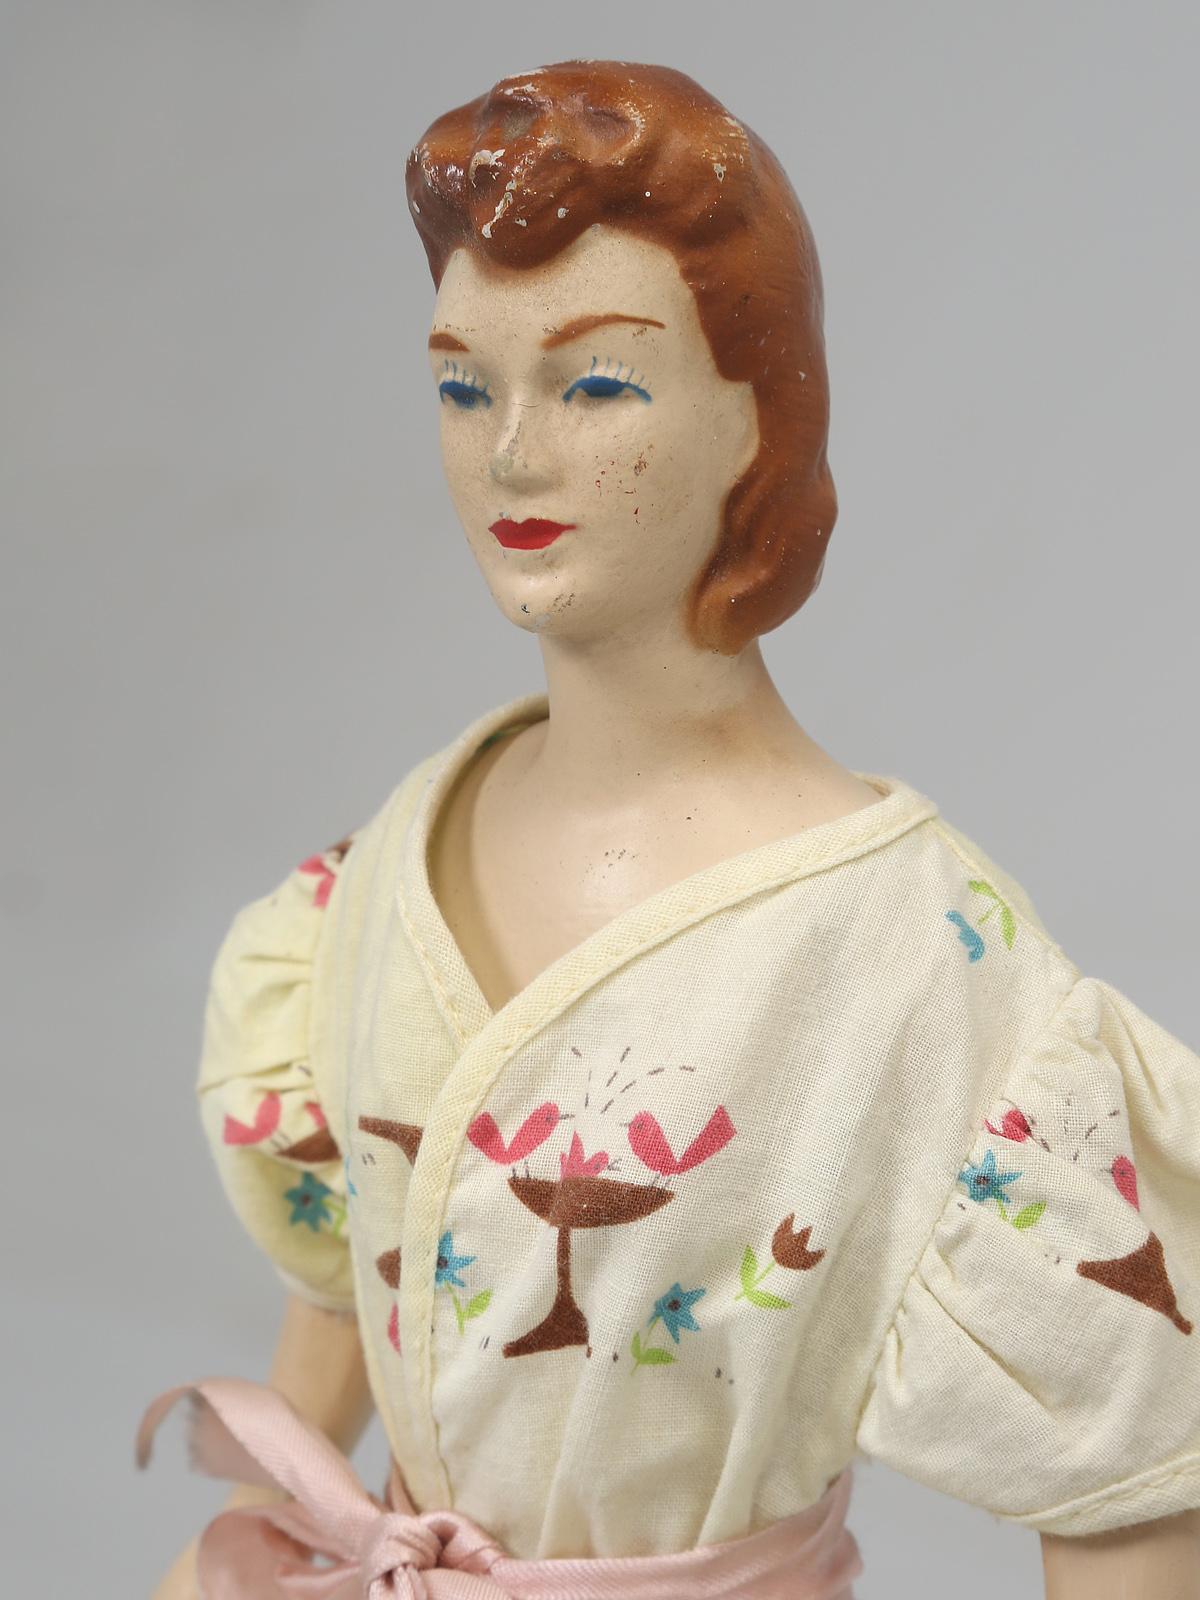 In the 1940s seeing a miniature mannequin in a department store would be common place. These would have been placed on the counters, so you could see what the available dresses would look like. Our guess is that this is probably late 1940s and is